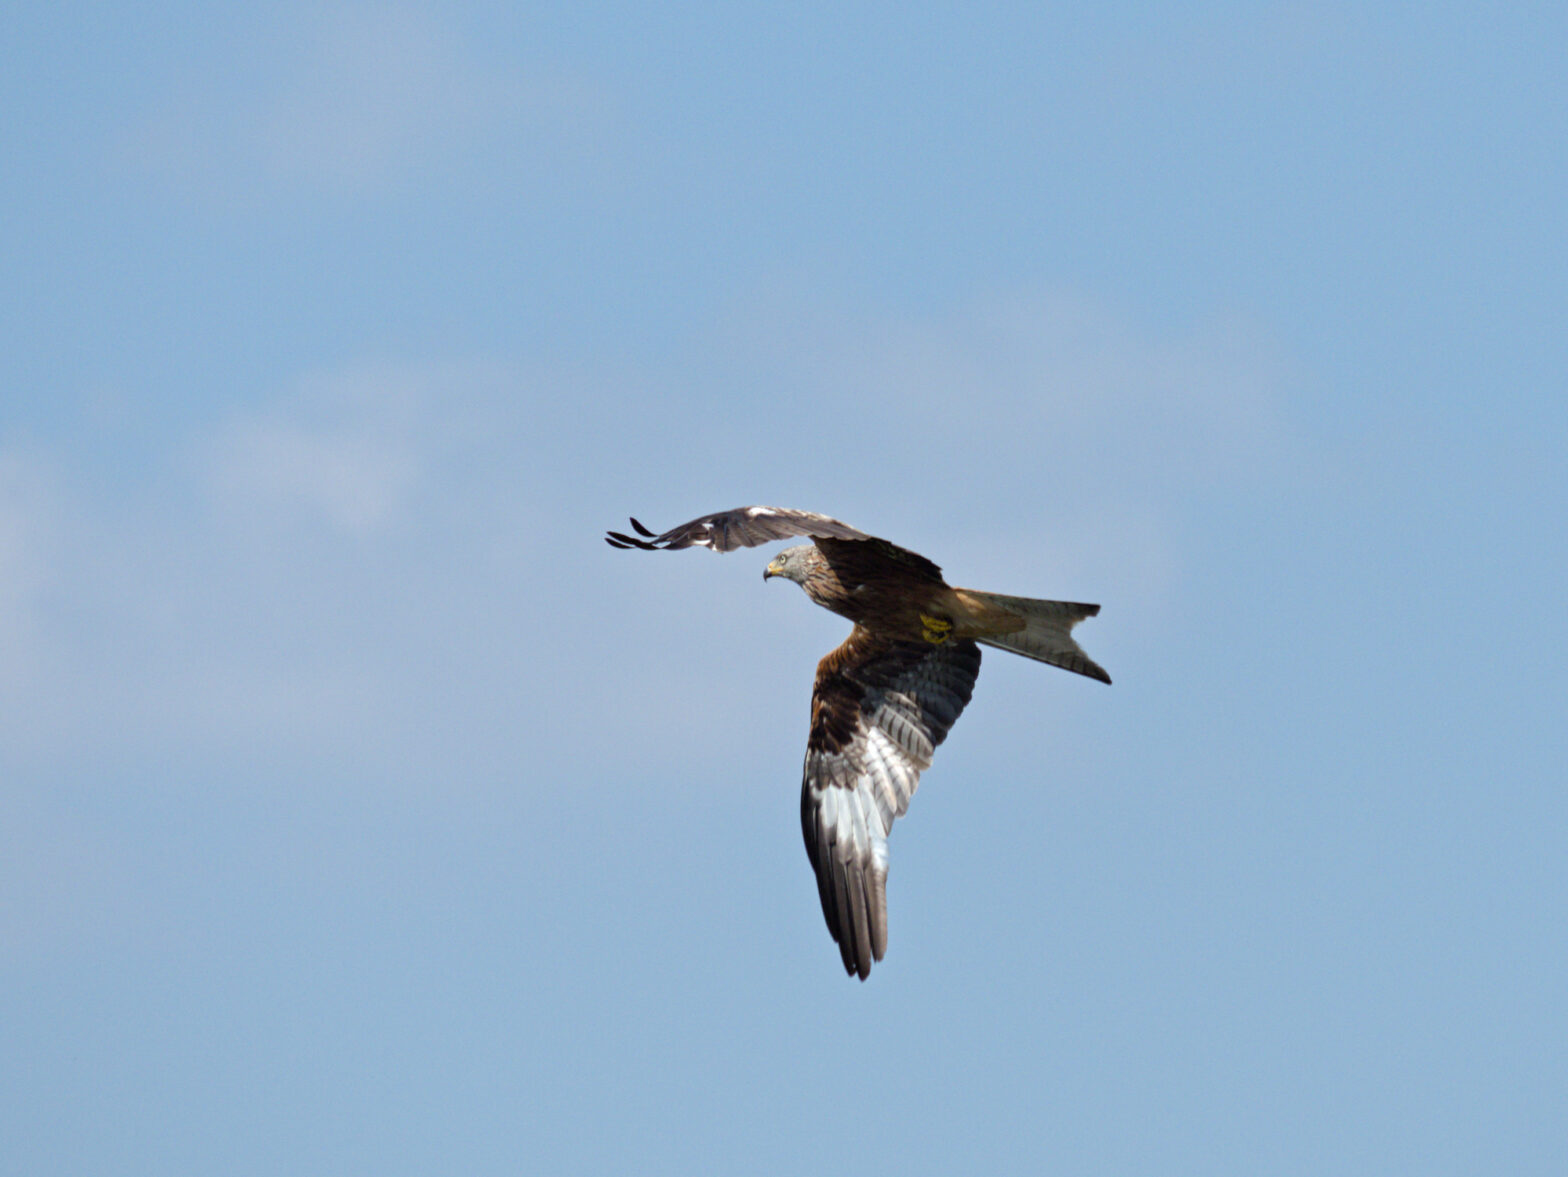 A red kite in flight against blue sky and thin clouds